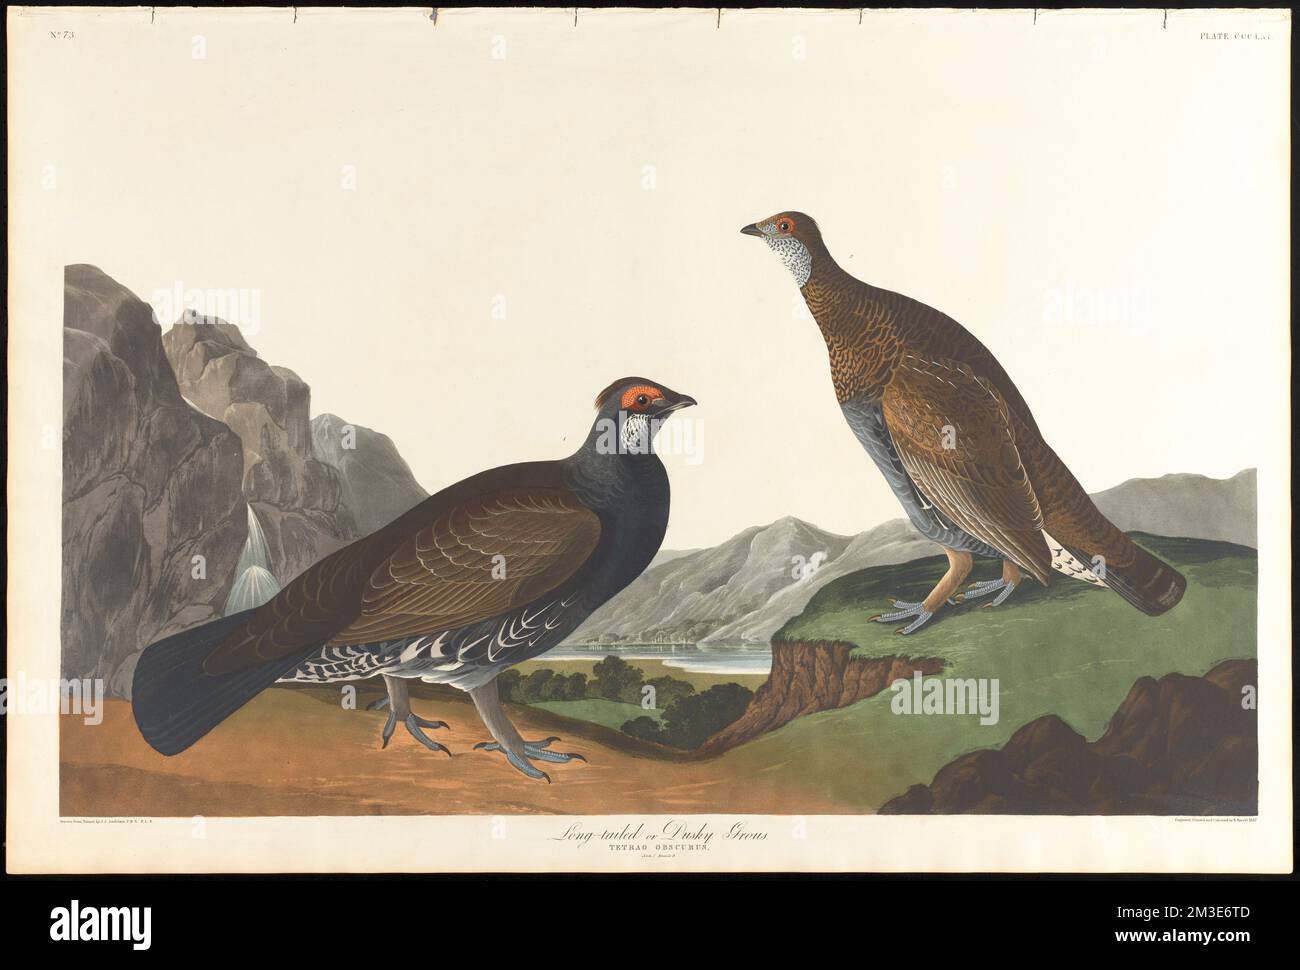 Long-tailed or dusky grous : Tetrao obscurus. Male, 1. Female, 2. c.1 v.4 plate 361 , Grouse, Blue grouse. The Birds of America- From Original Drawings by John James Audubon Stock Photo